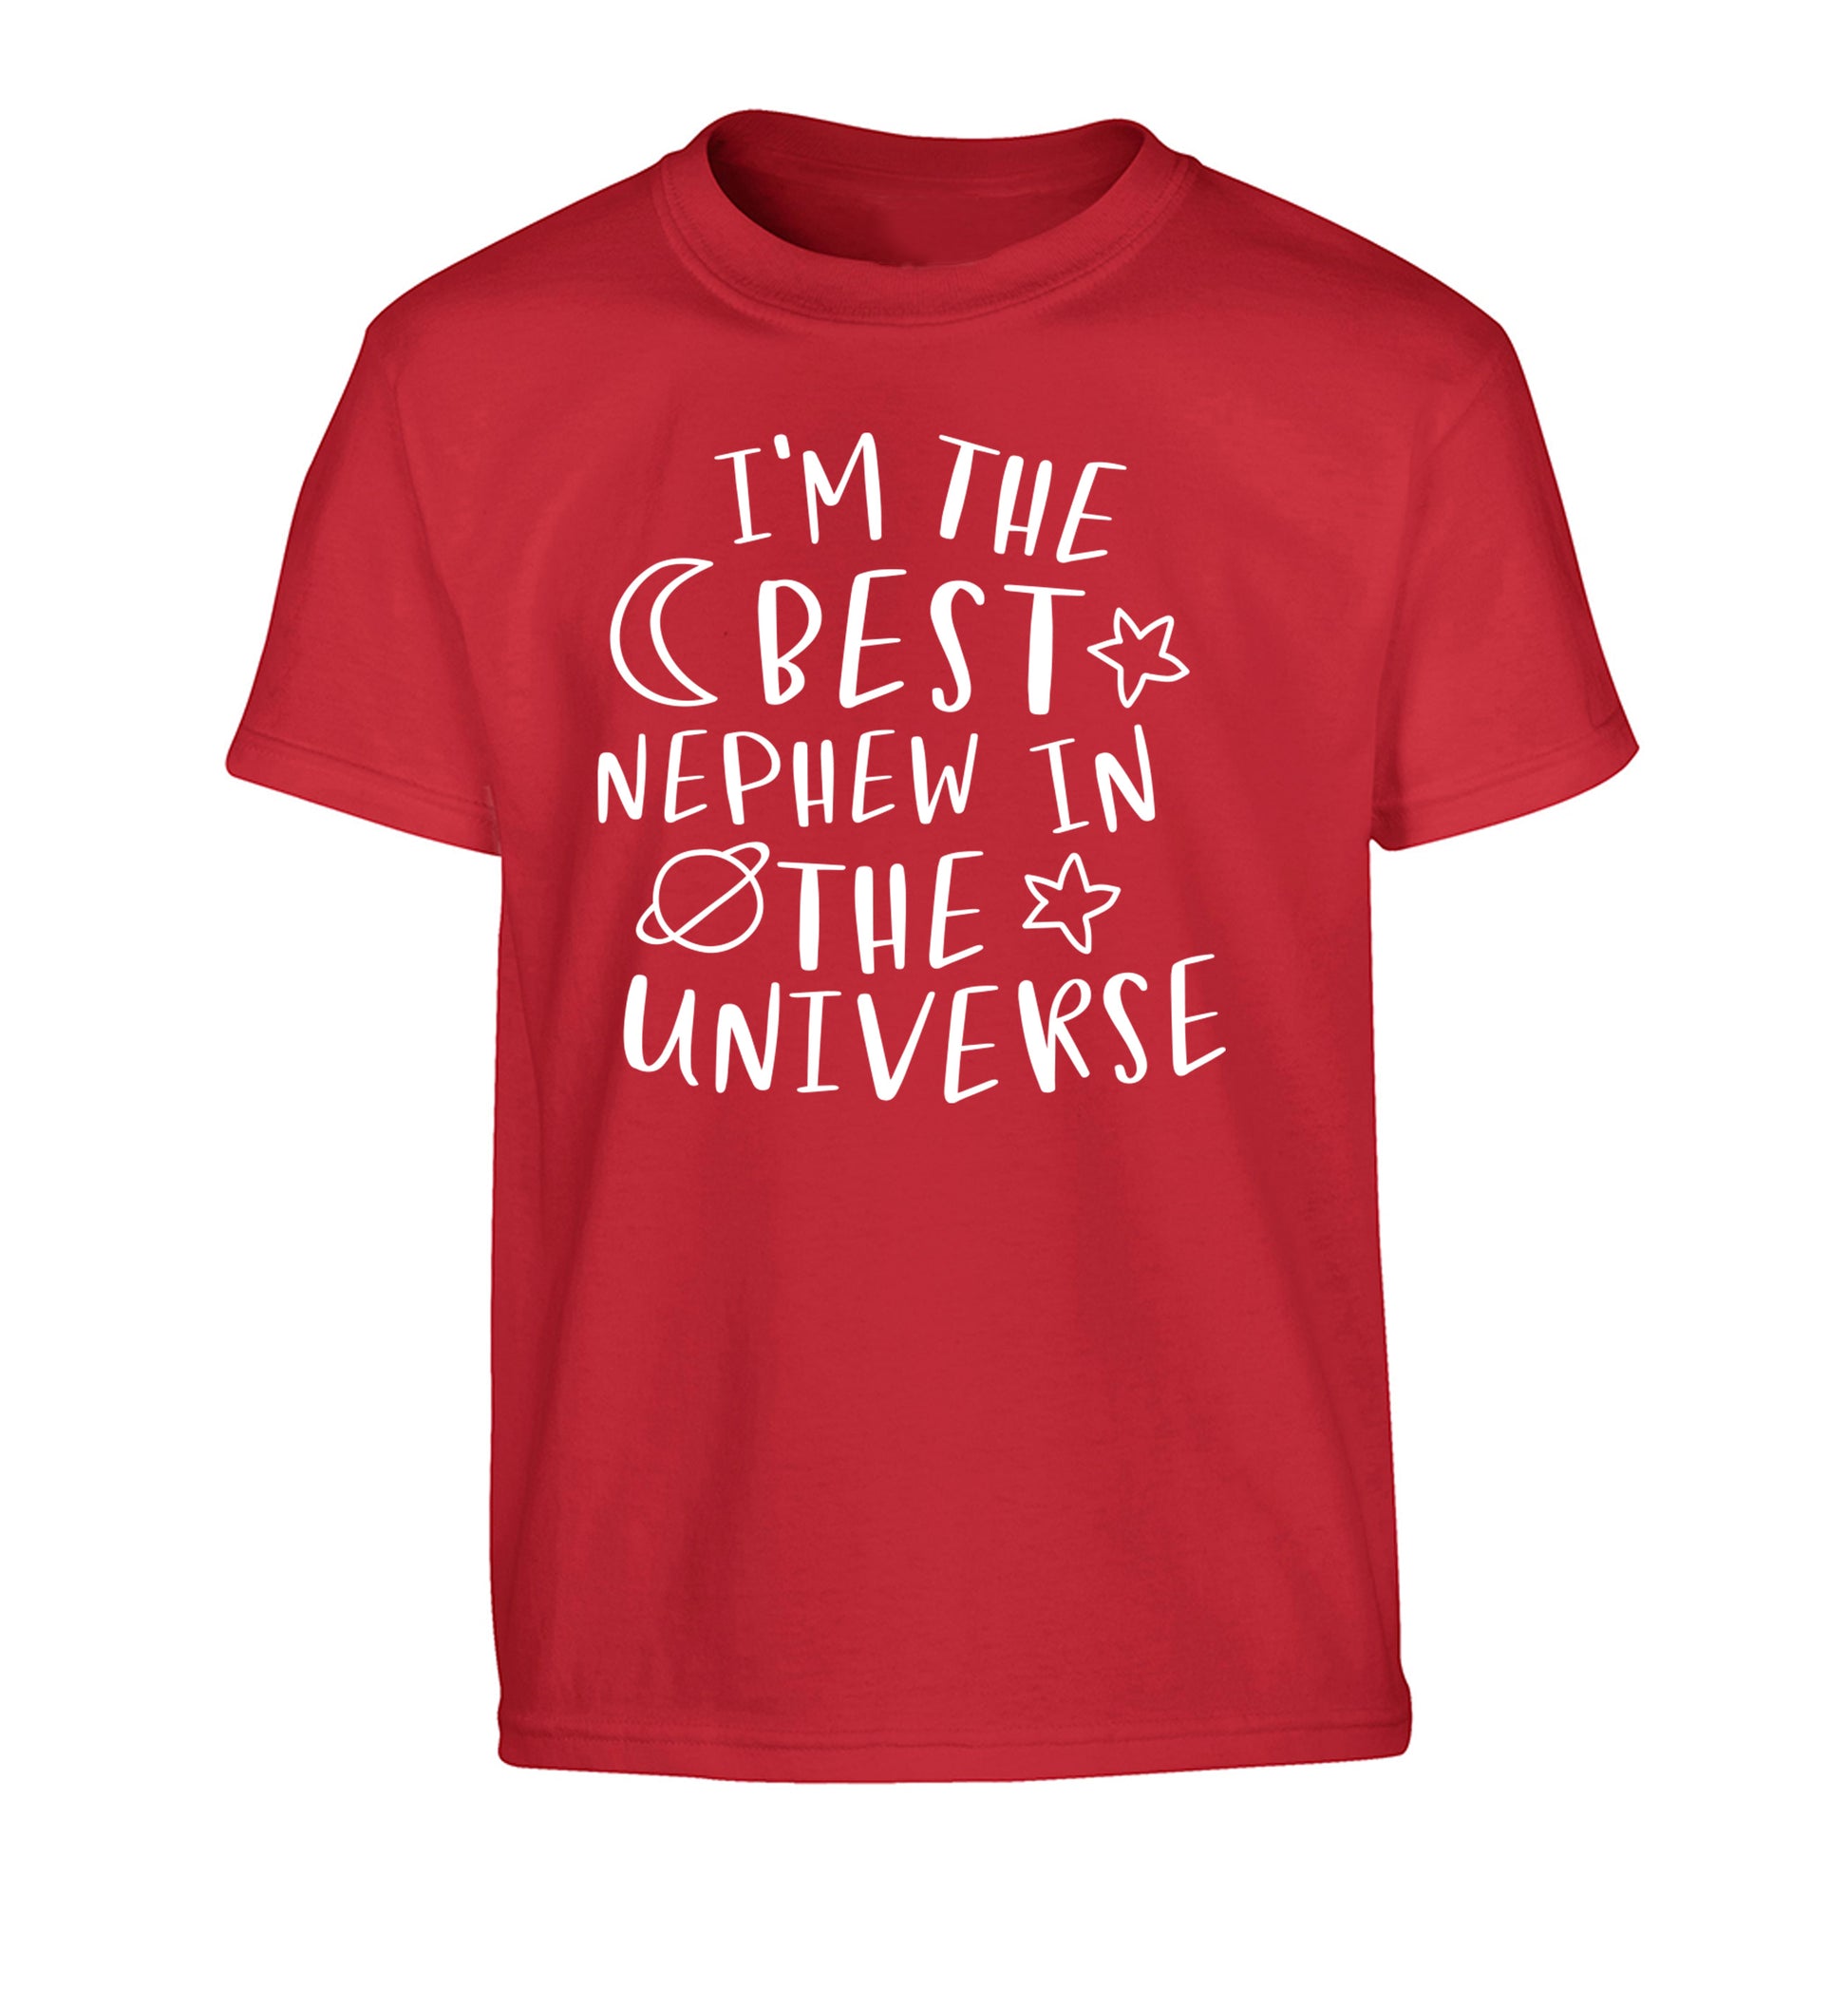 I'm the best nephew in the universe Children's red Tshirt 12-13 Years